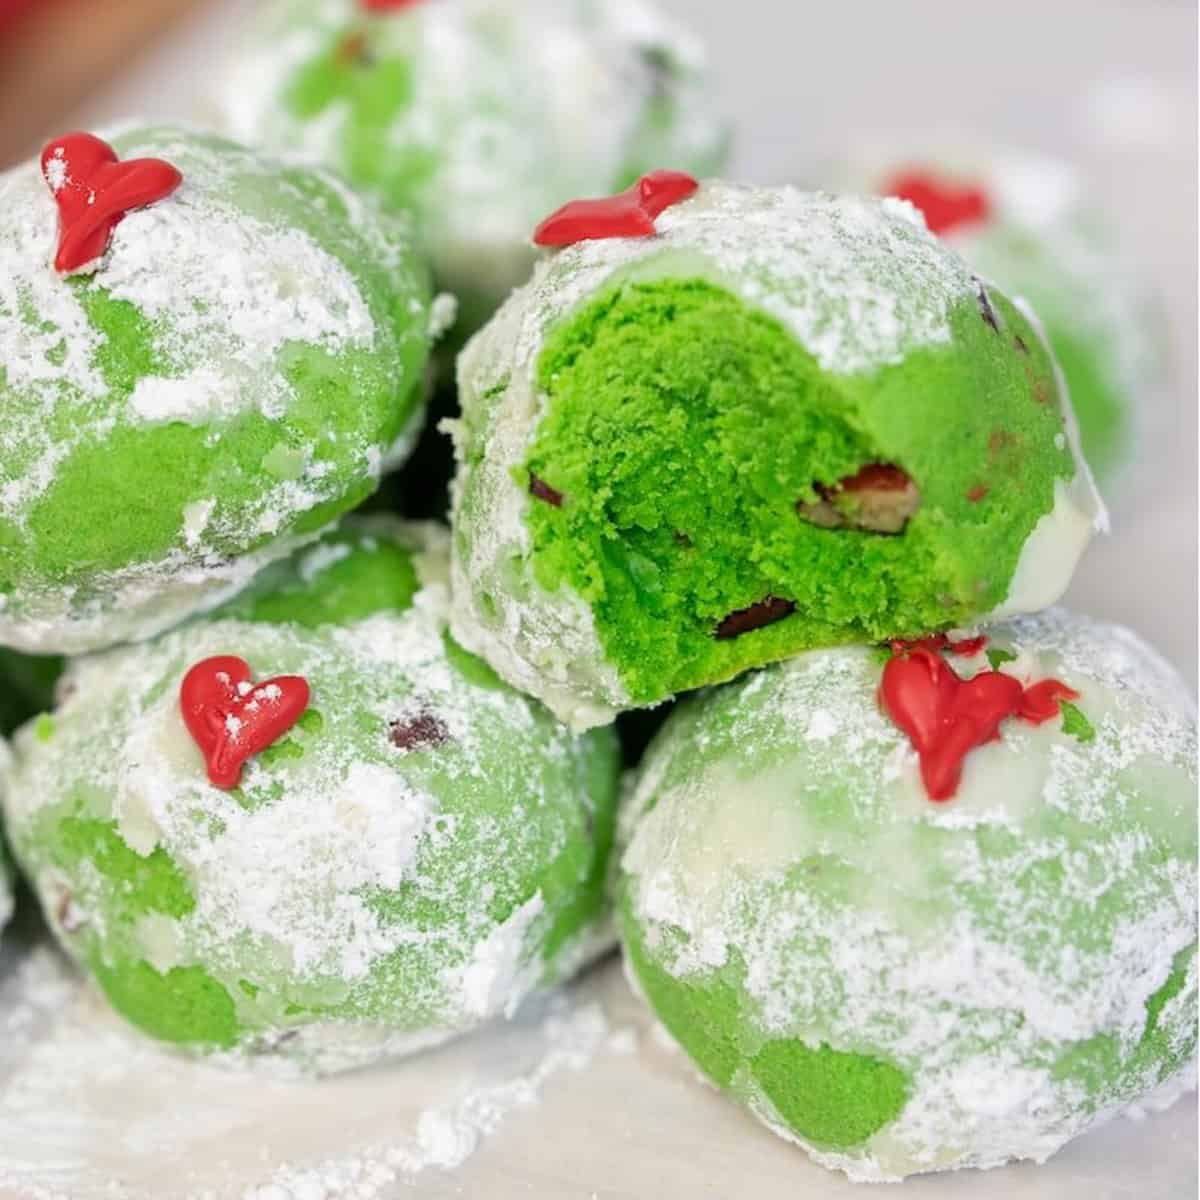 A pile of round green cookies with a dusting of powdered sugar on them.